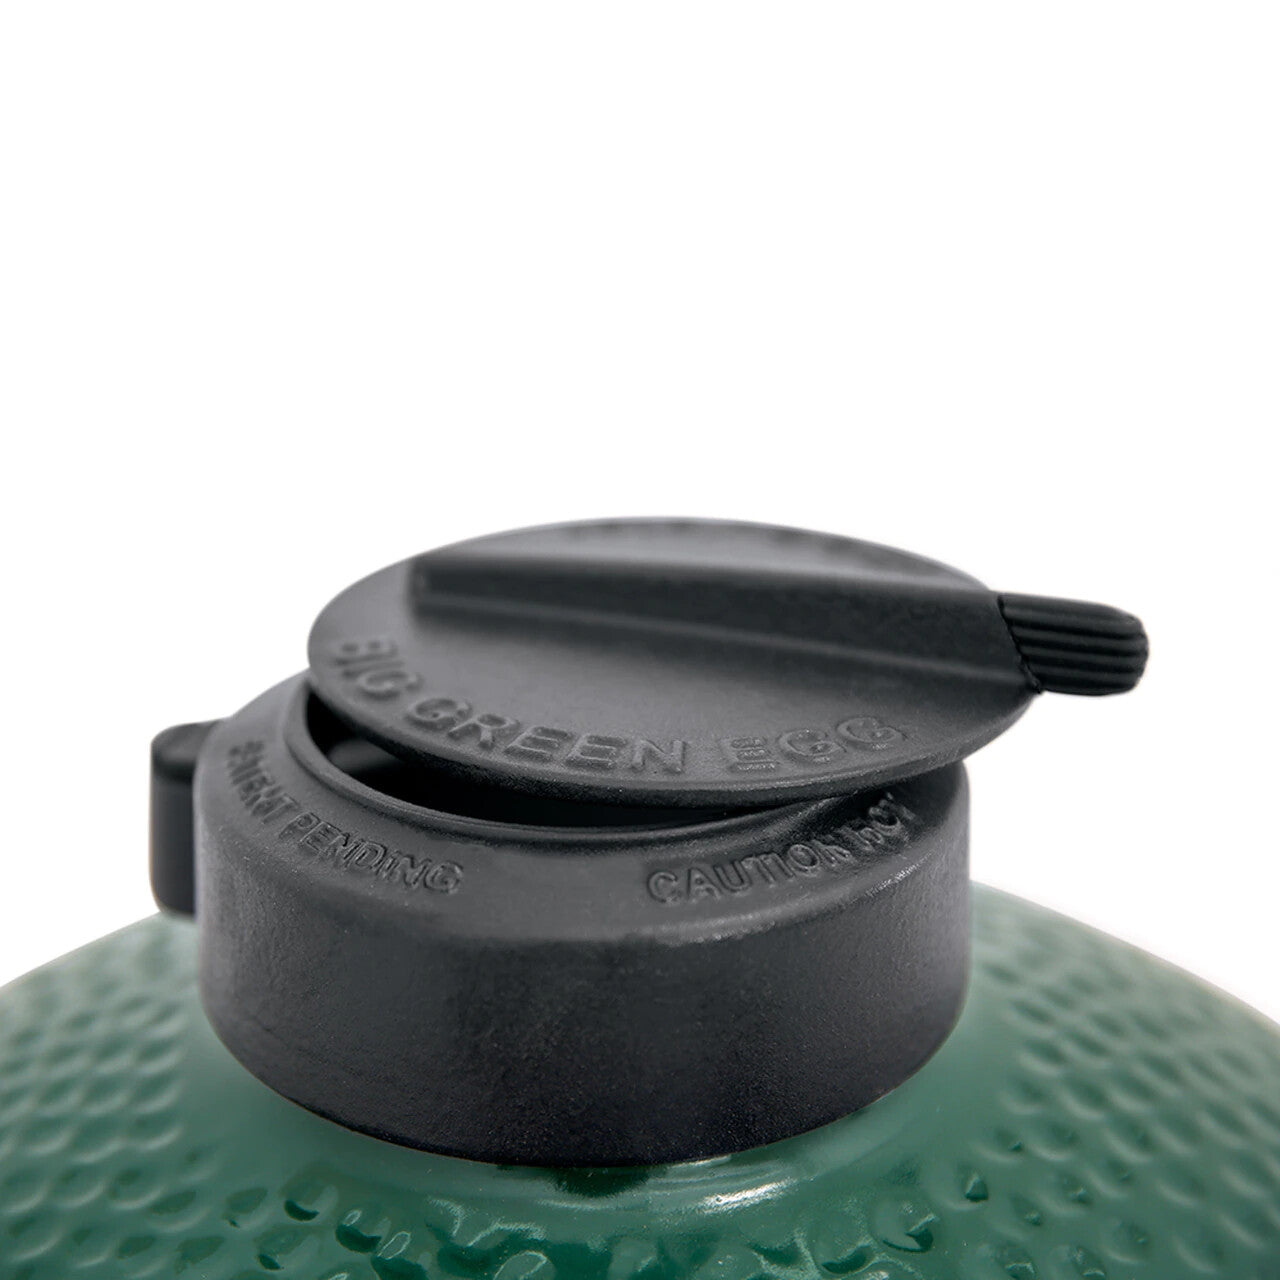 XLarge Big Green Egg in 72-inch Modern Farmhouse Table Package